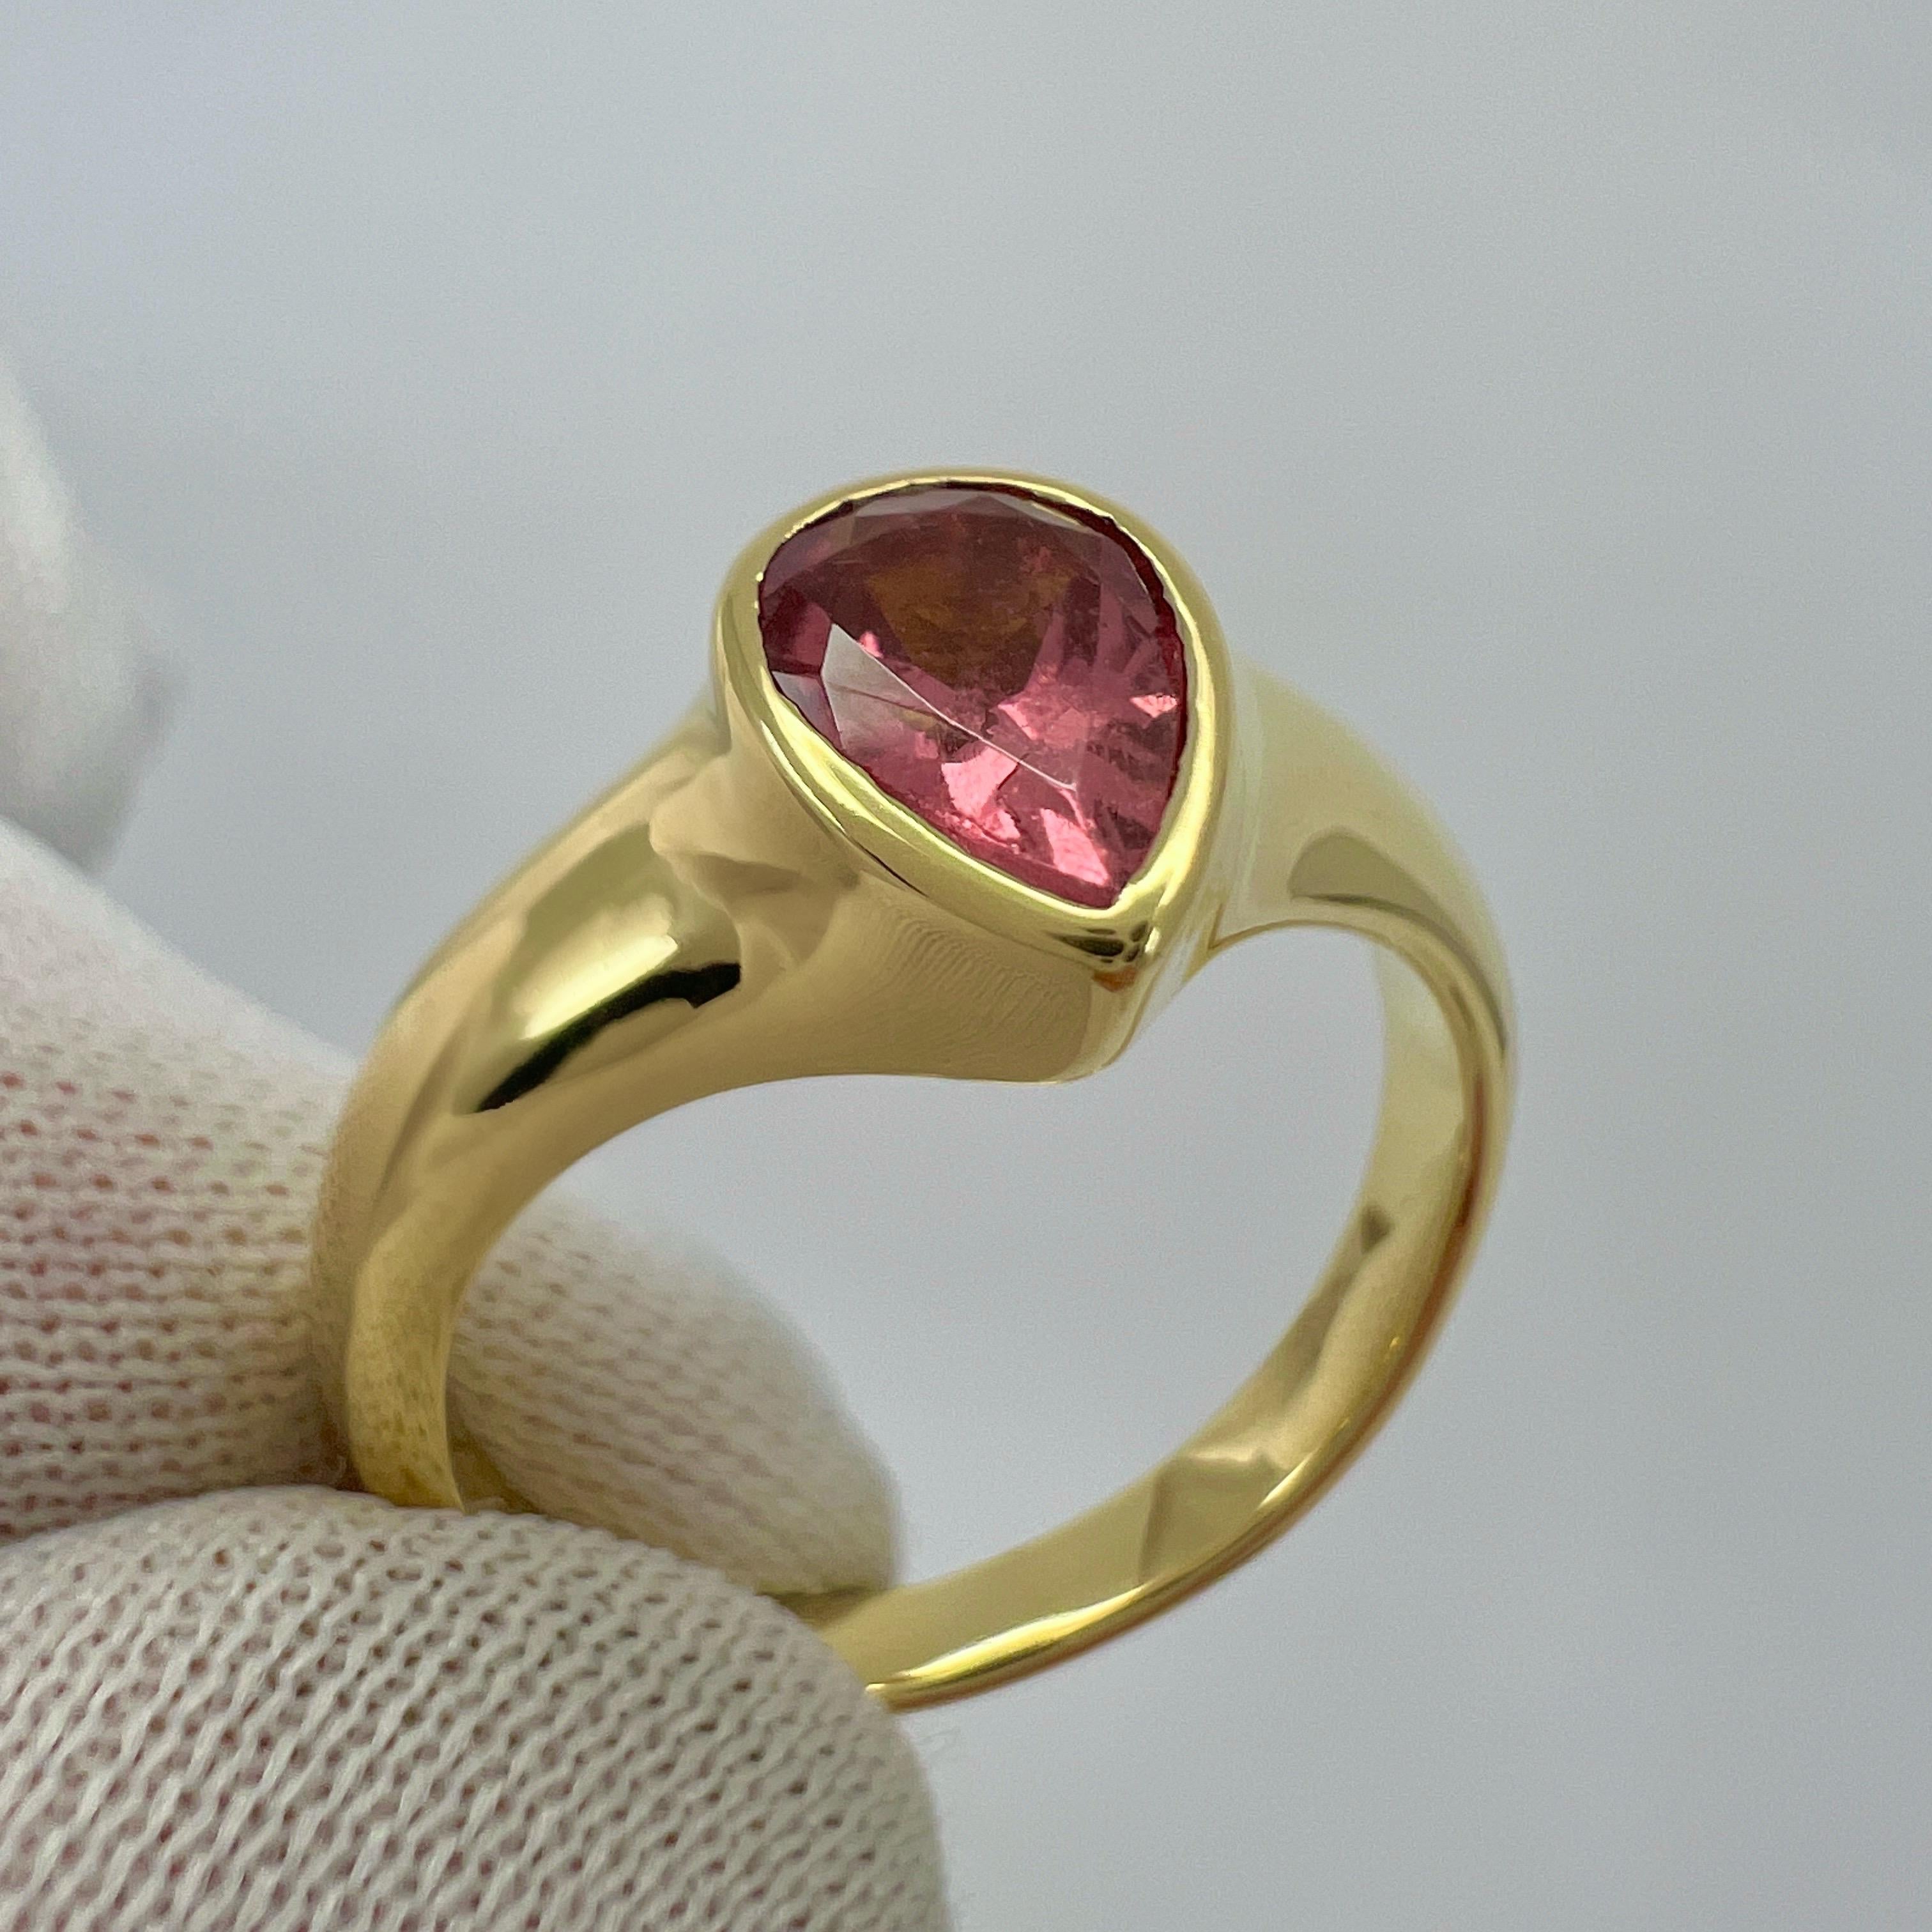 Women's or Men's Rare Vintage Van Cleef & Arpels Pink Tourmaline Pear Cut 18k Yellow Gold Ring For Sale